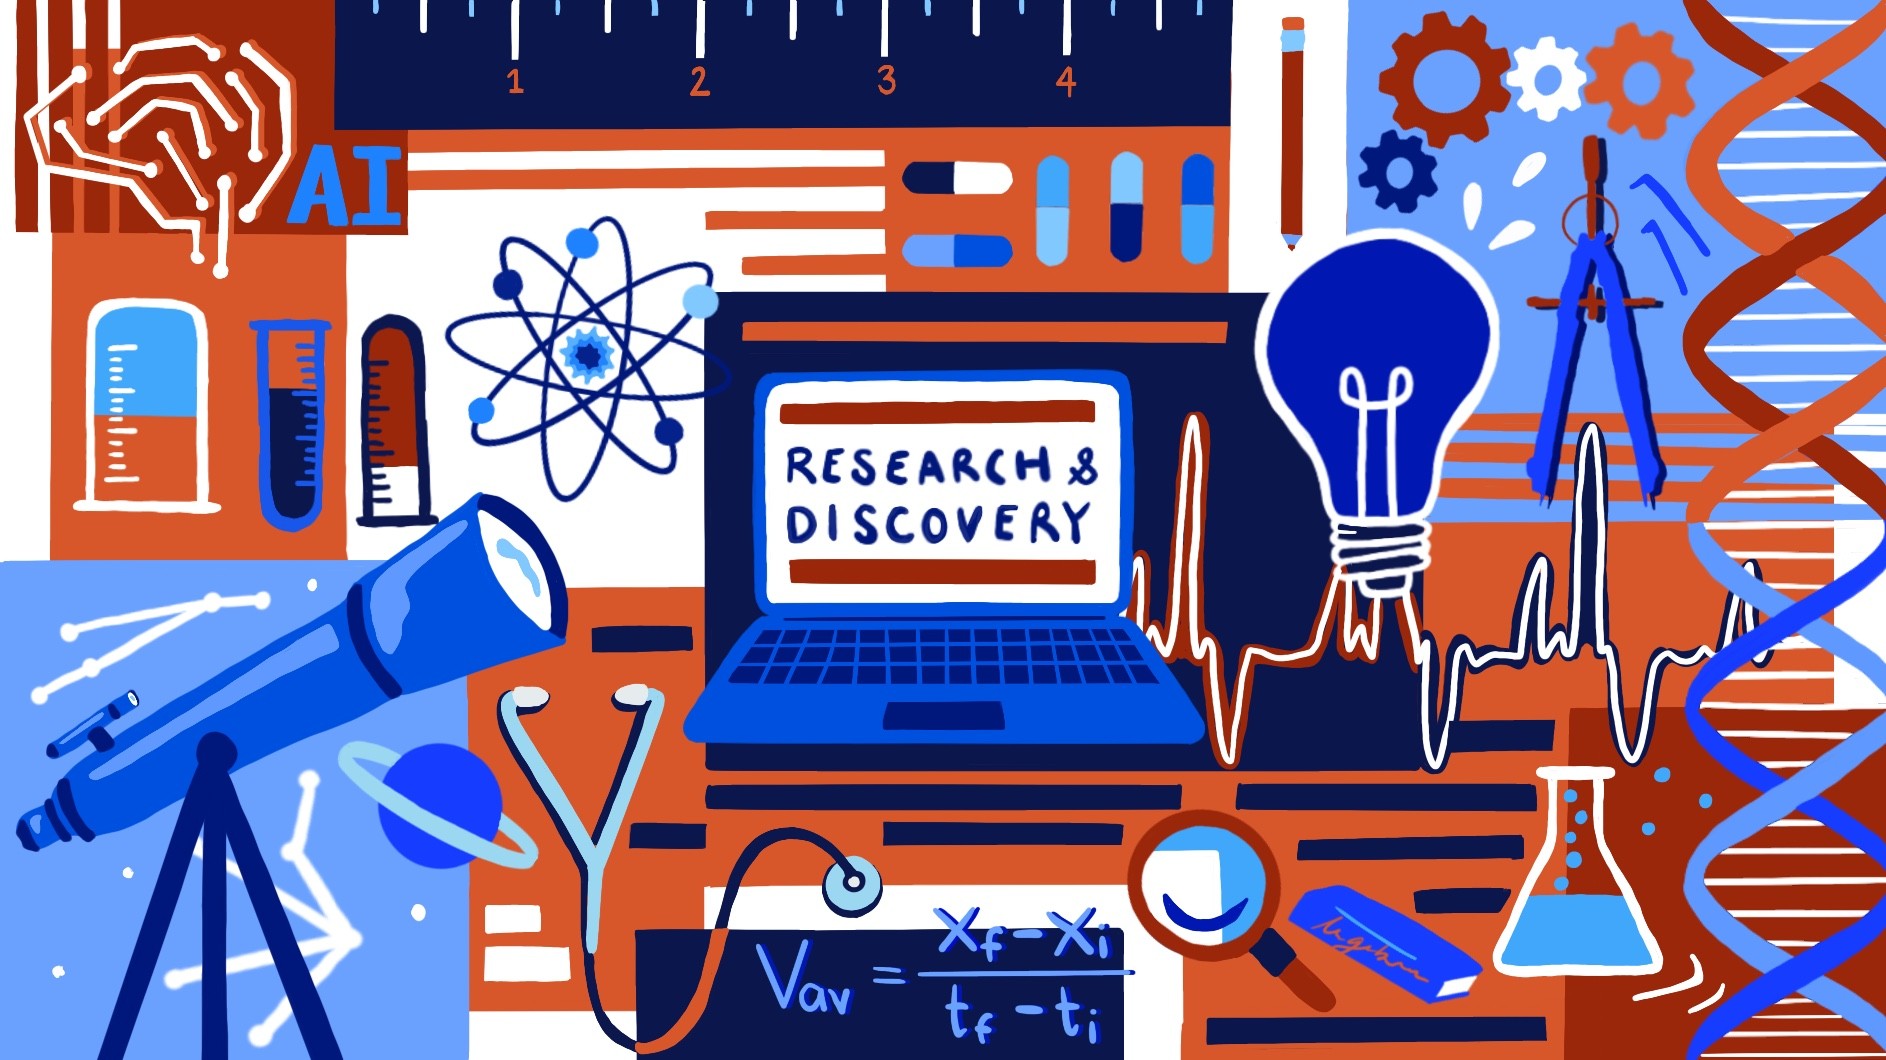 Research and Discovery cartoon illustration